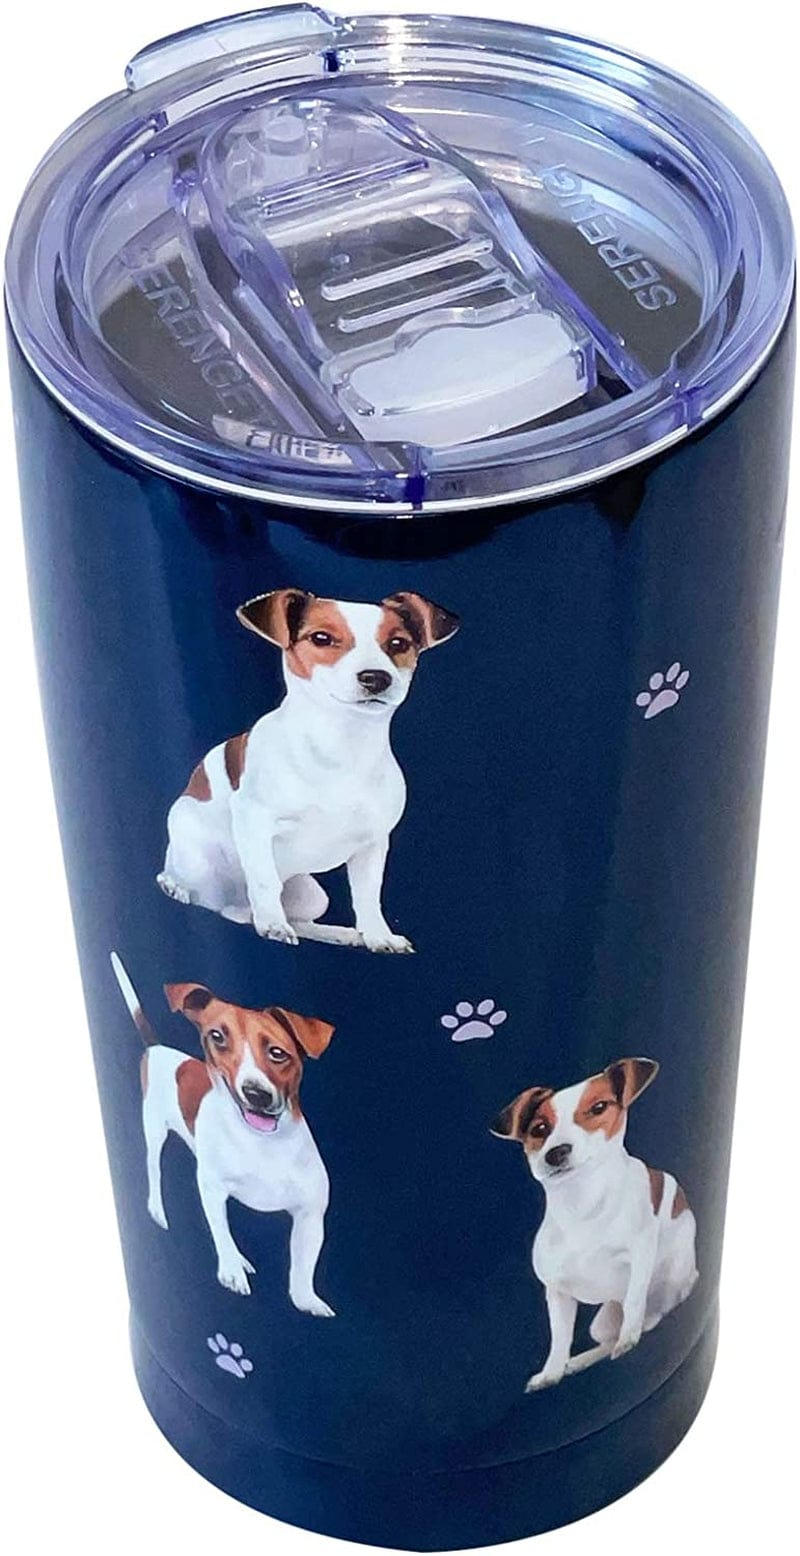 Australian Shepherd SERENGETI 16 Oz. Stainless Steel, Vacuum Insulated Tumbler with Spill Proof Lid - 3D Print - Insulated Travel Mug for Hot or Cold Drinks (Australian Shepherd Tumbler) Home & Garden > Kitchen & Dining > Tableware > Drinkware SERENGETI Jack Russell Terrier Tumbler  